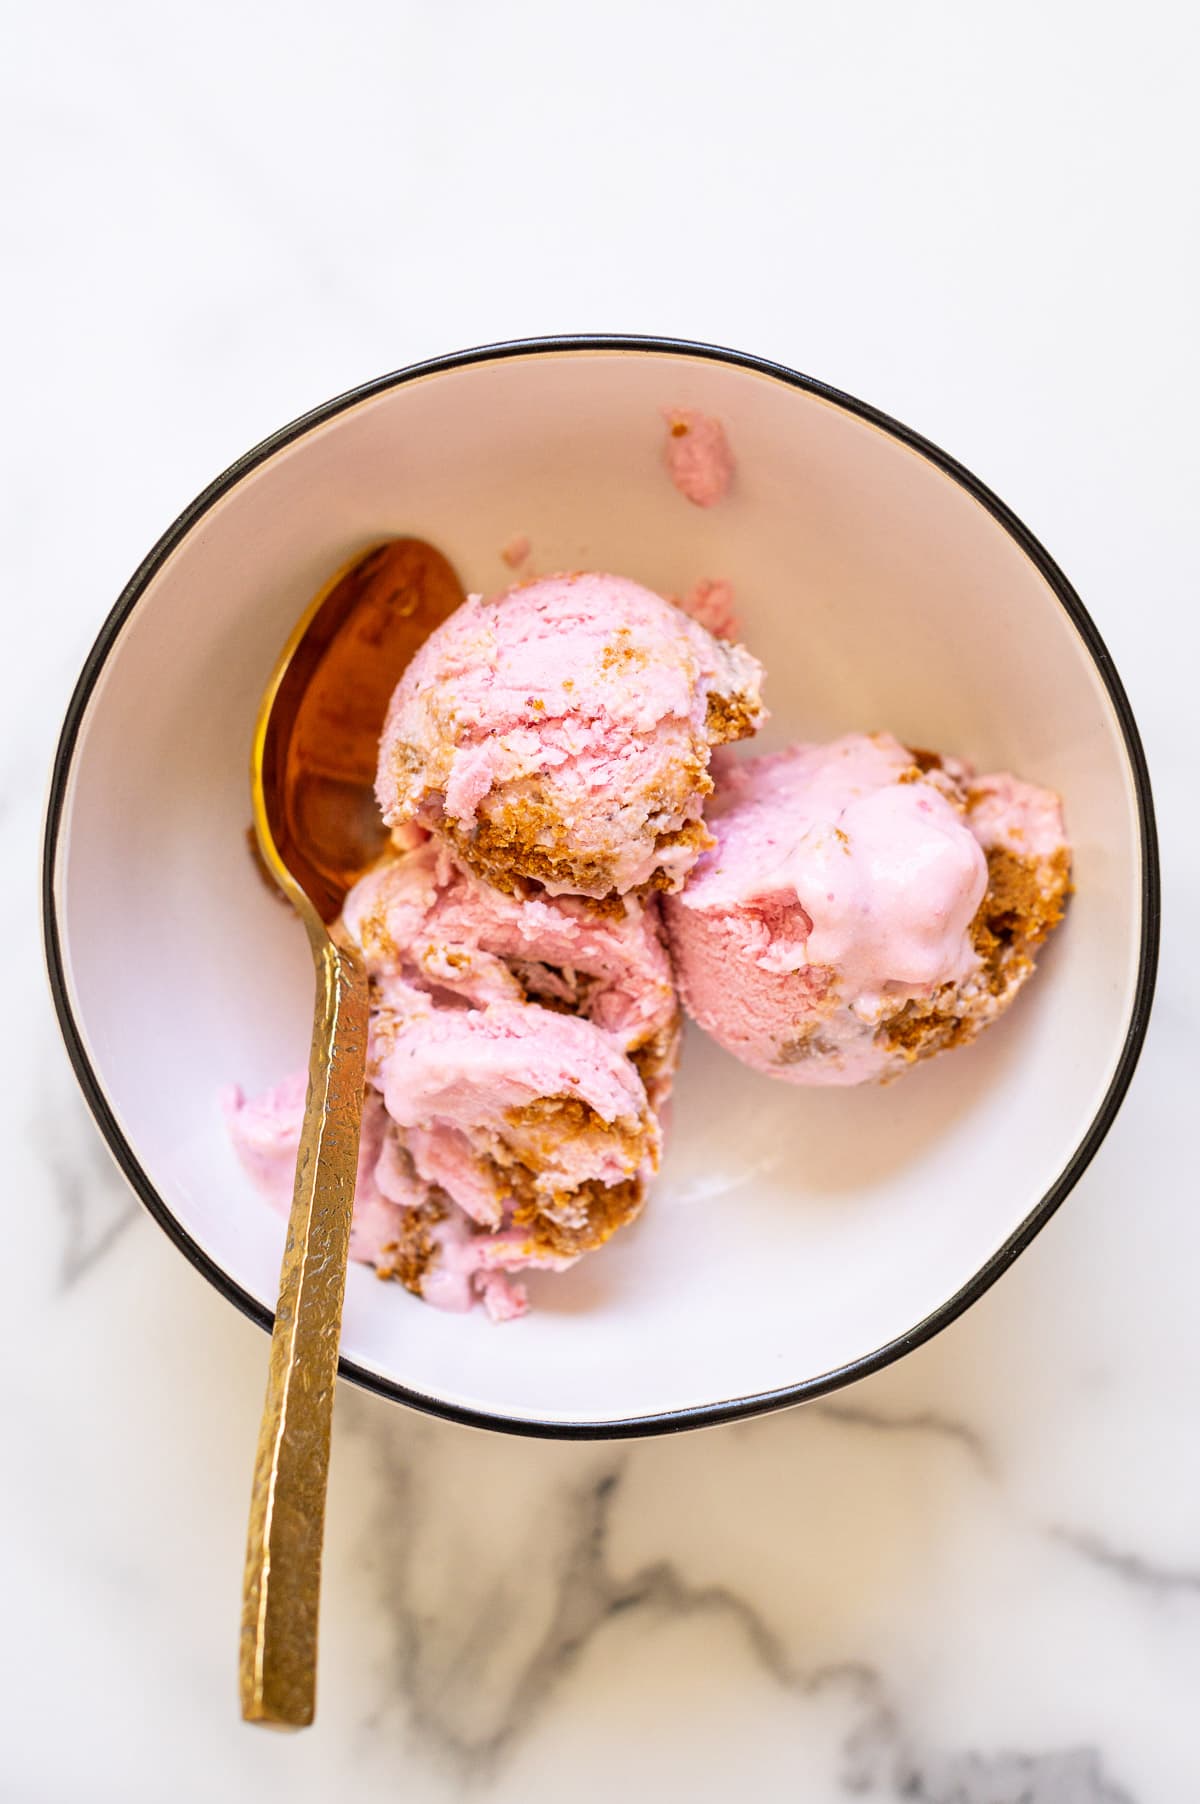 Strawberry cheesecake cottage cheese ice cream scoops in a bowl.